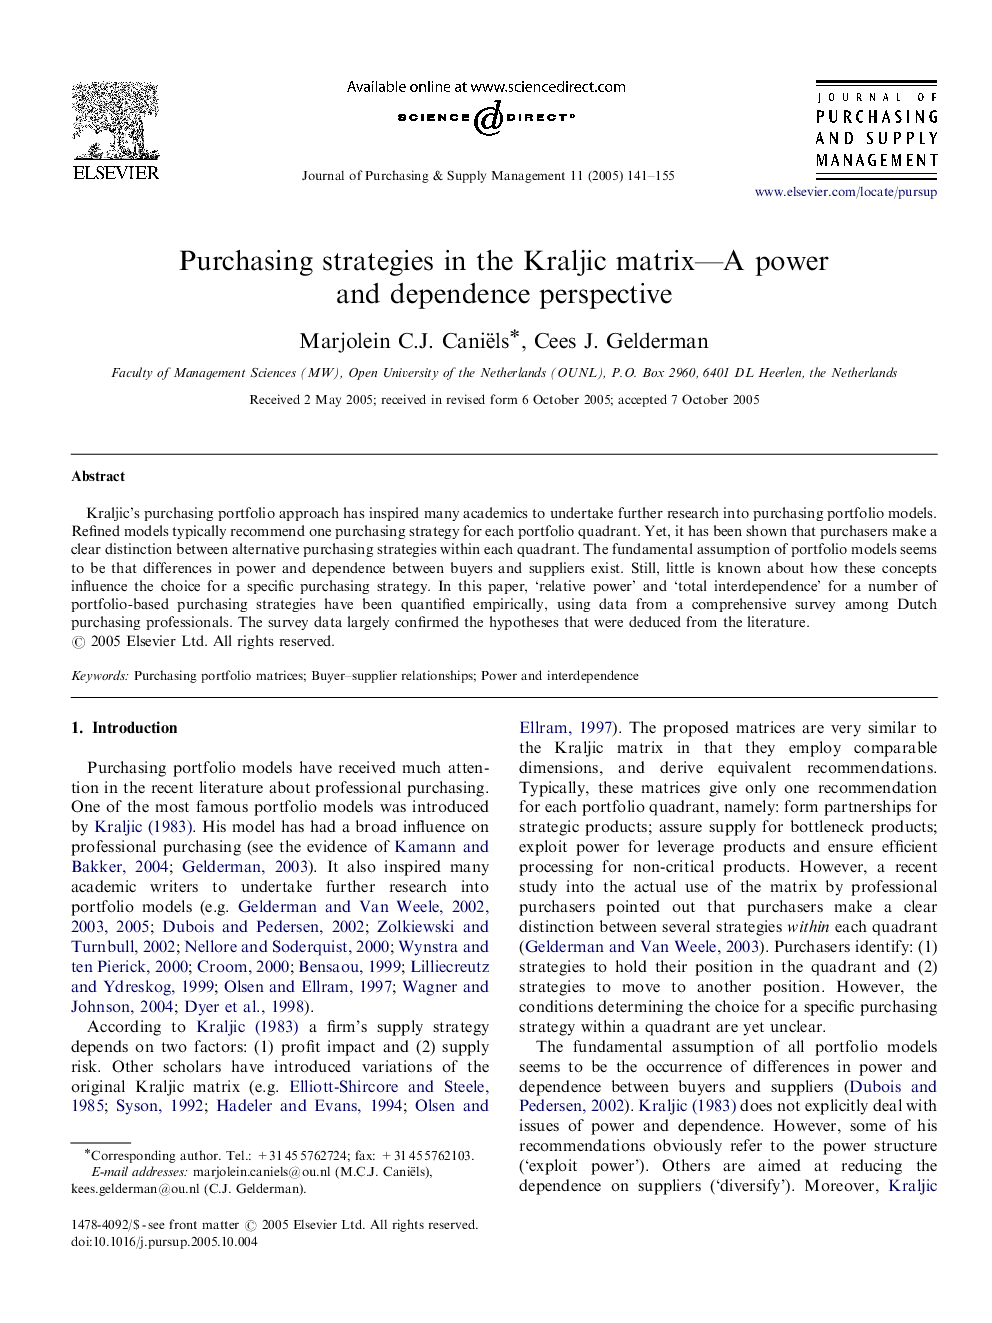 Purchasing strategies in the Kraljic matrix-A power and dependence perspective